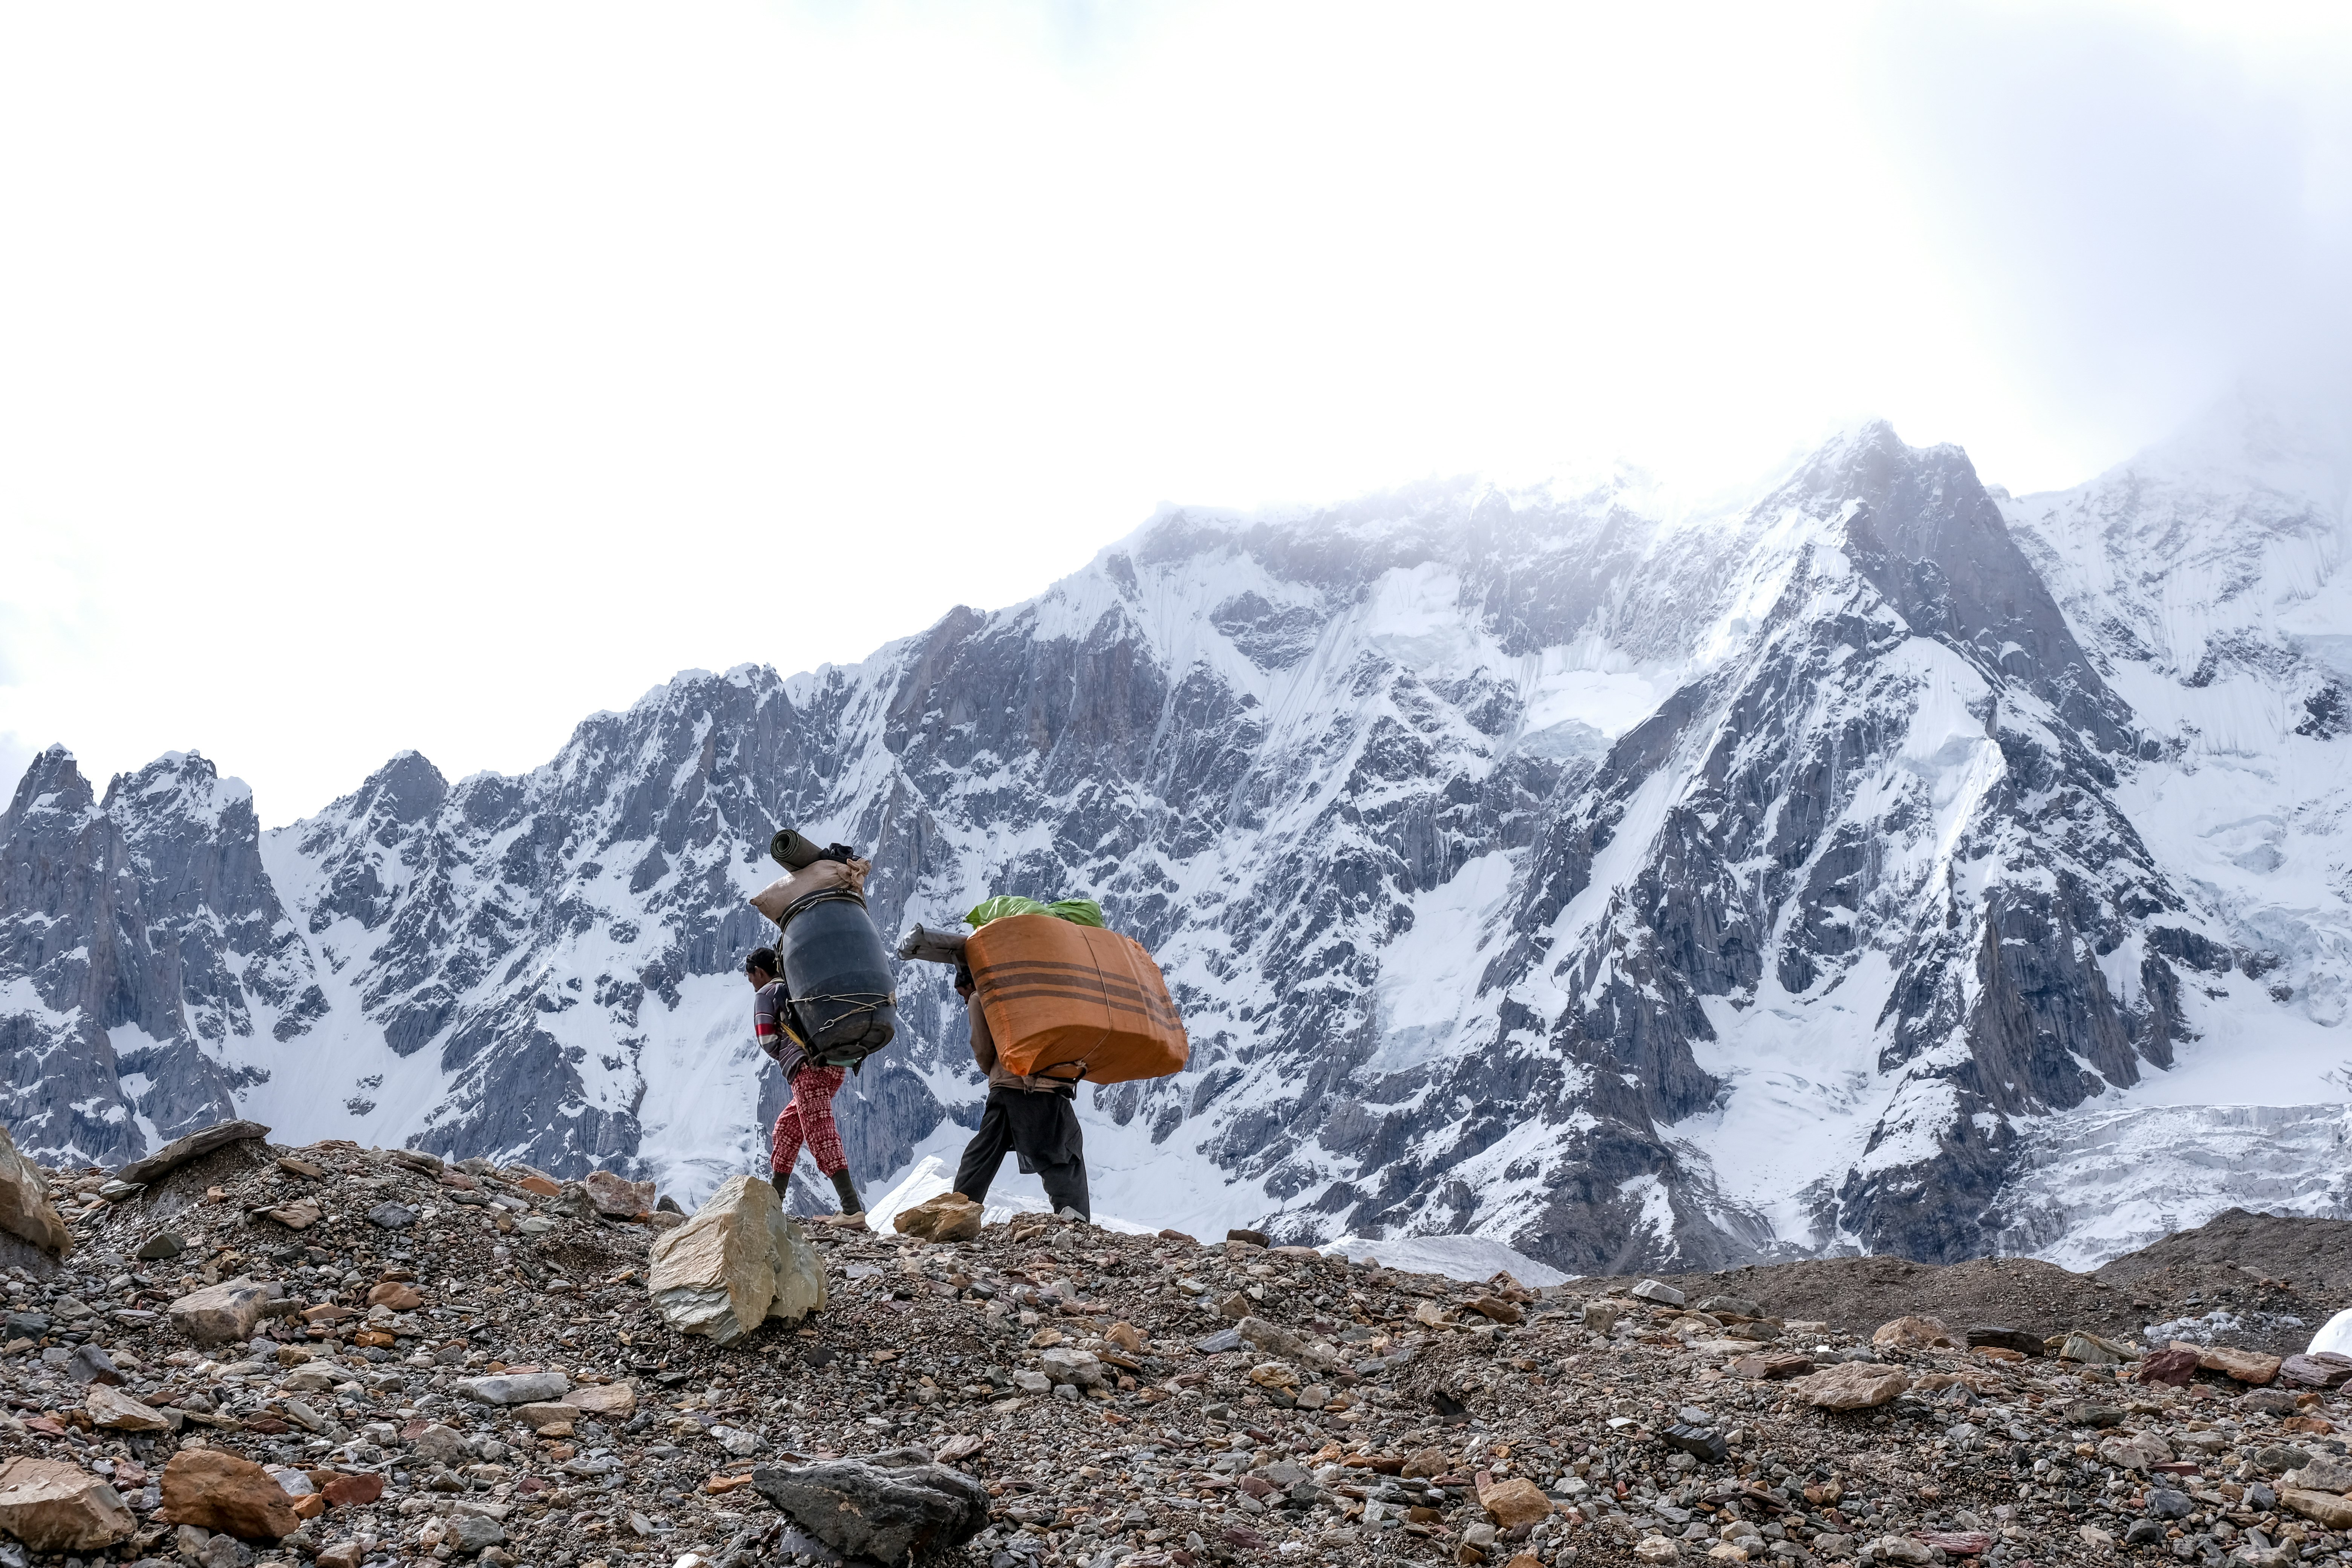 person in white jacket and brown pants carrying orange umbrella walking on rocky ground near snow